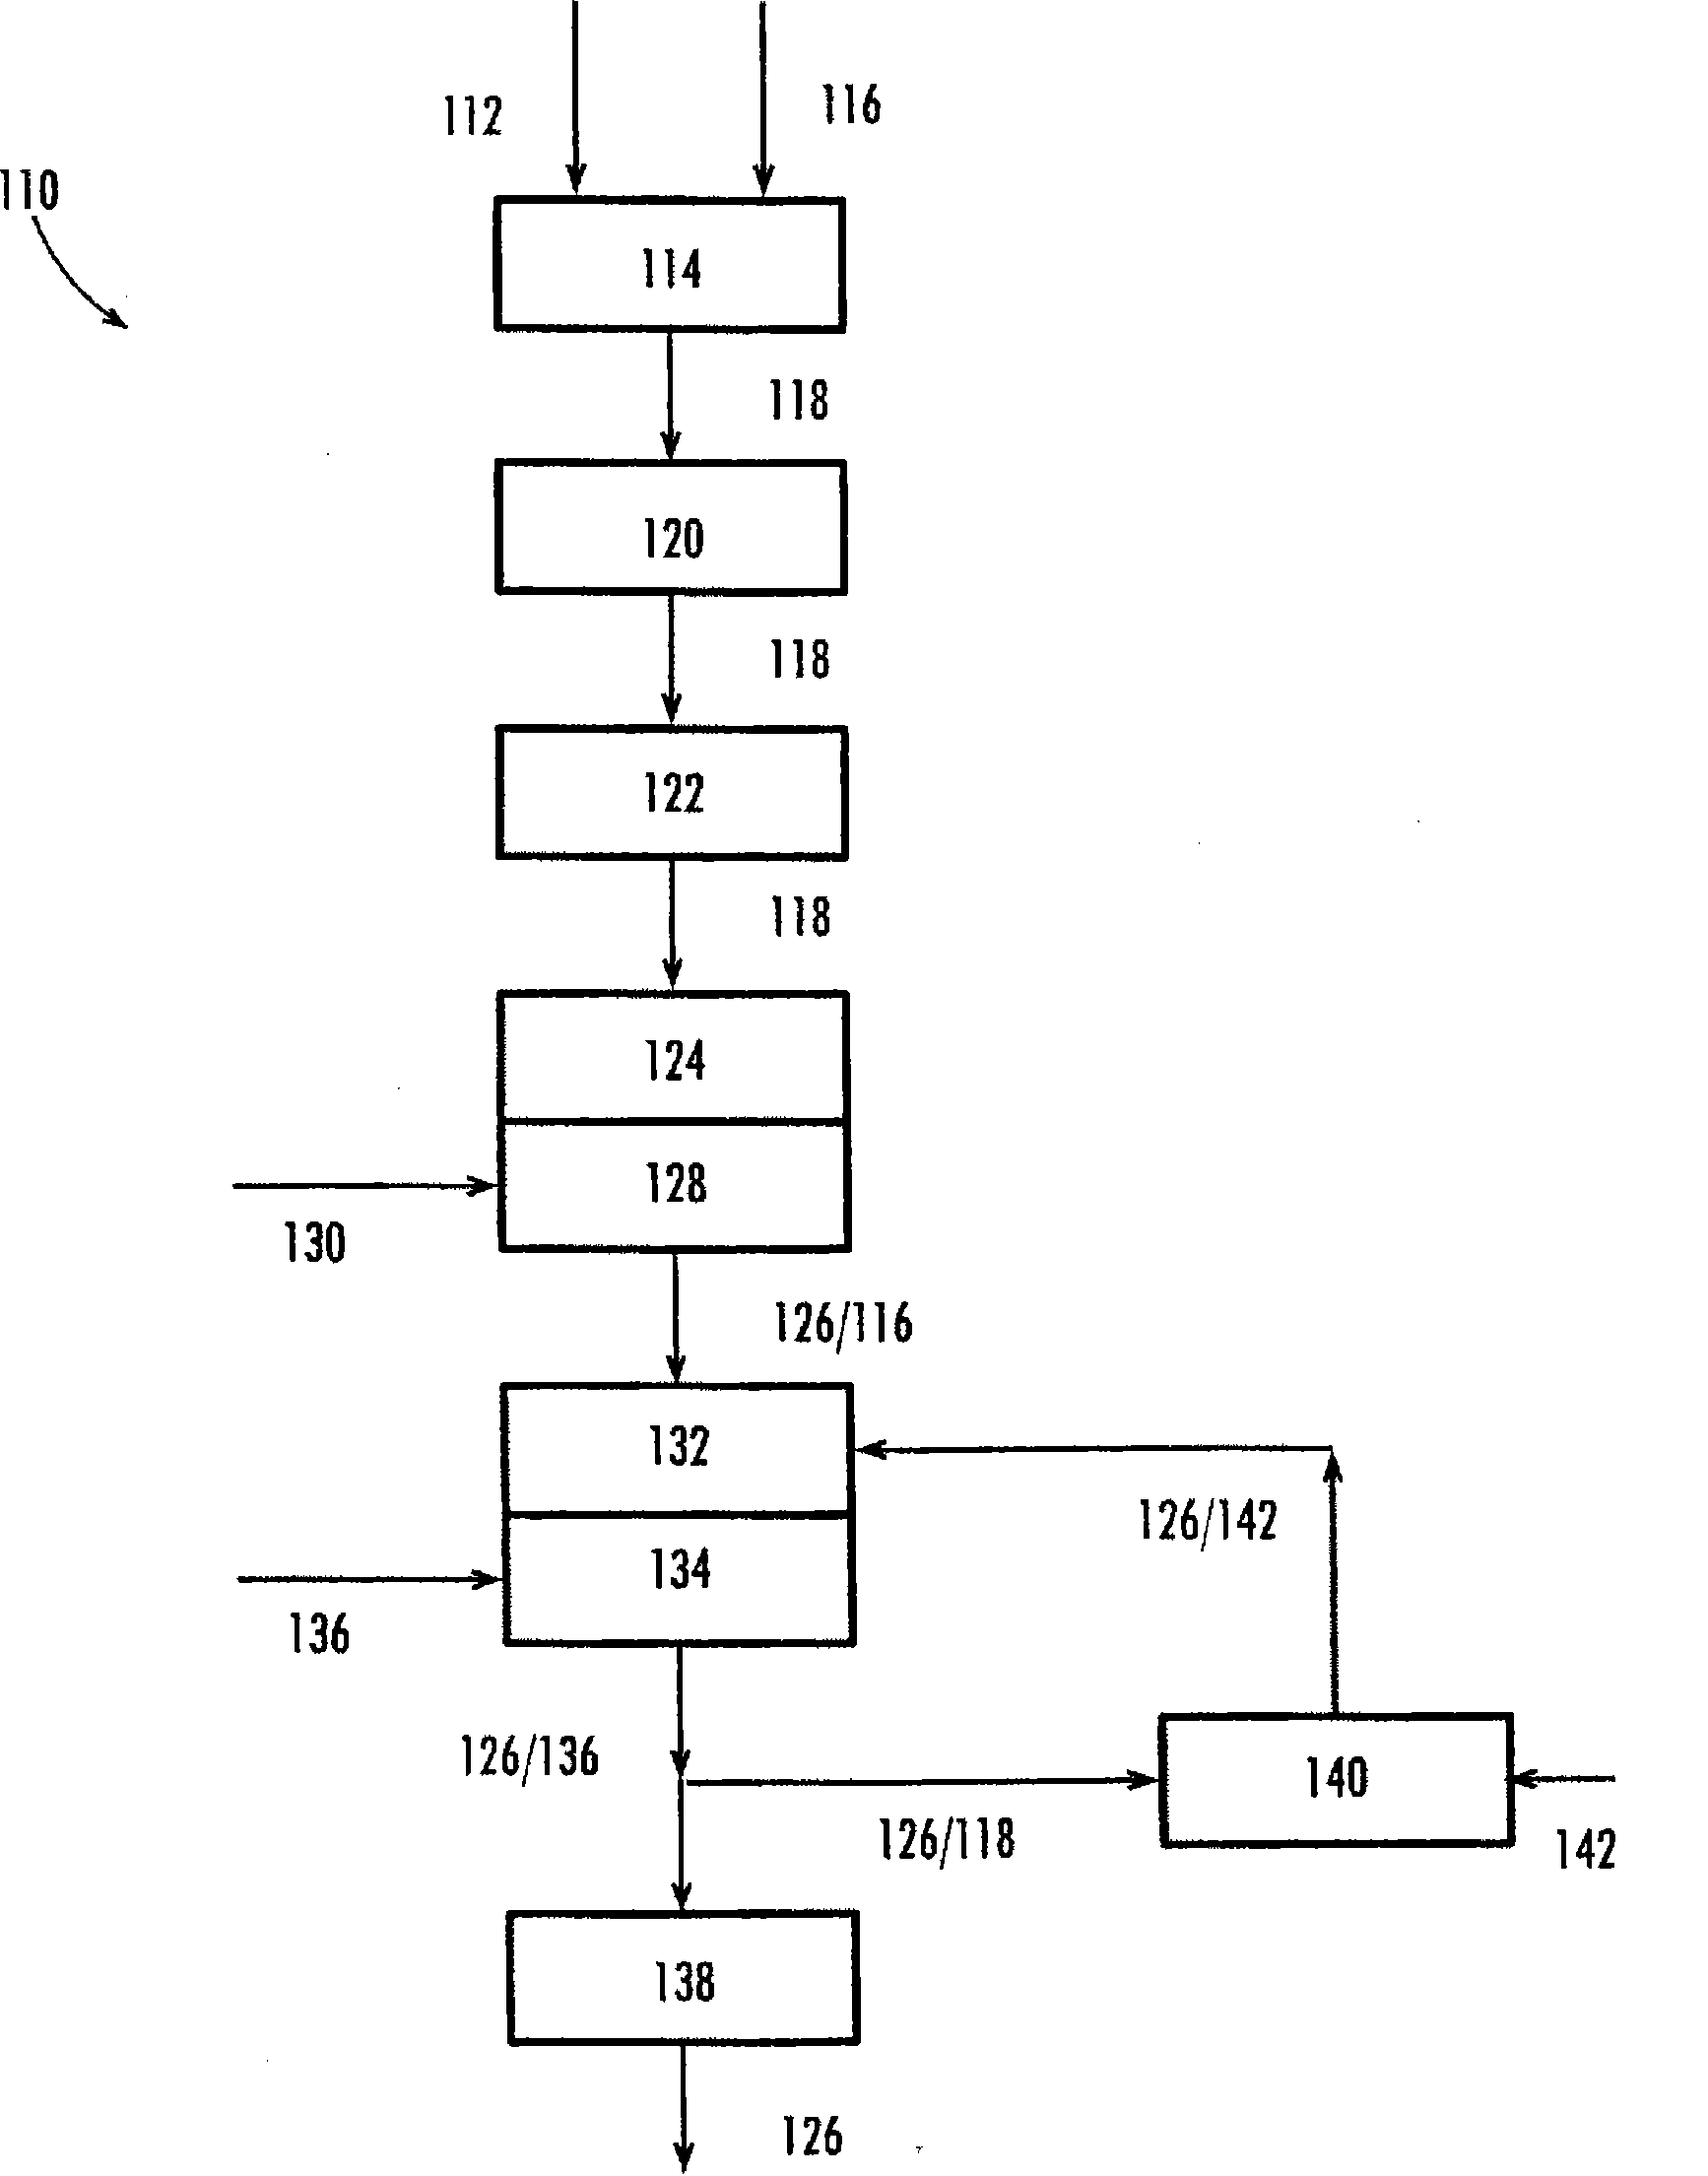 Rebaudioside a composition and method for purifying rebaudioside a